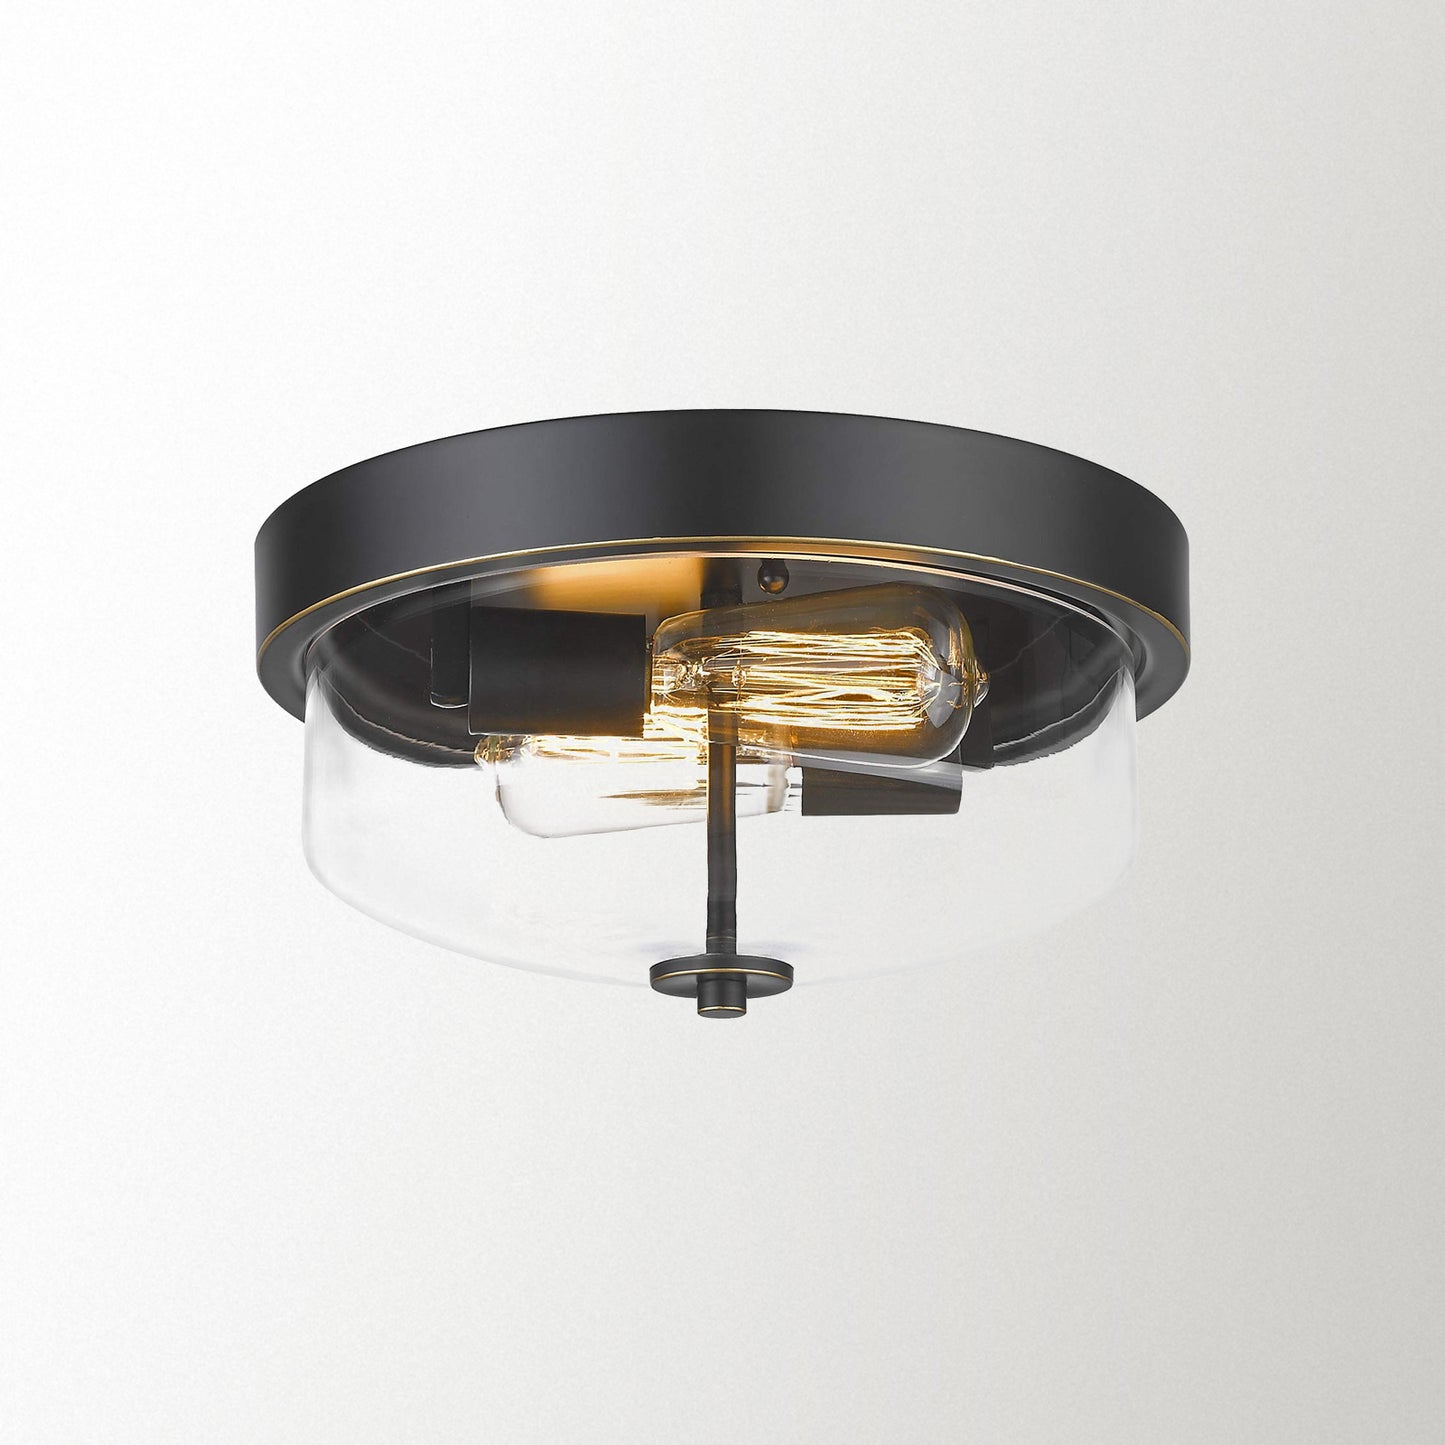 
                  
                    Emliviar 12 Inch Outdoor Ceiling Light - Farmhouse Flush Mount Close to Ceiling Light with Clear Glass Shade, Gold Finish, TE217F BG
                  
                